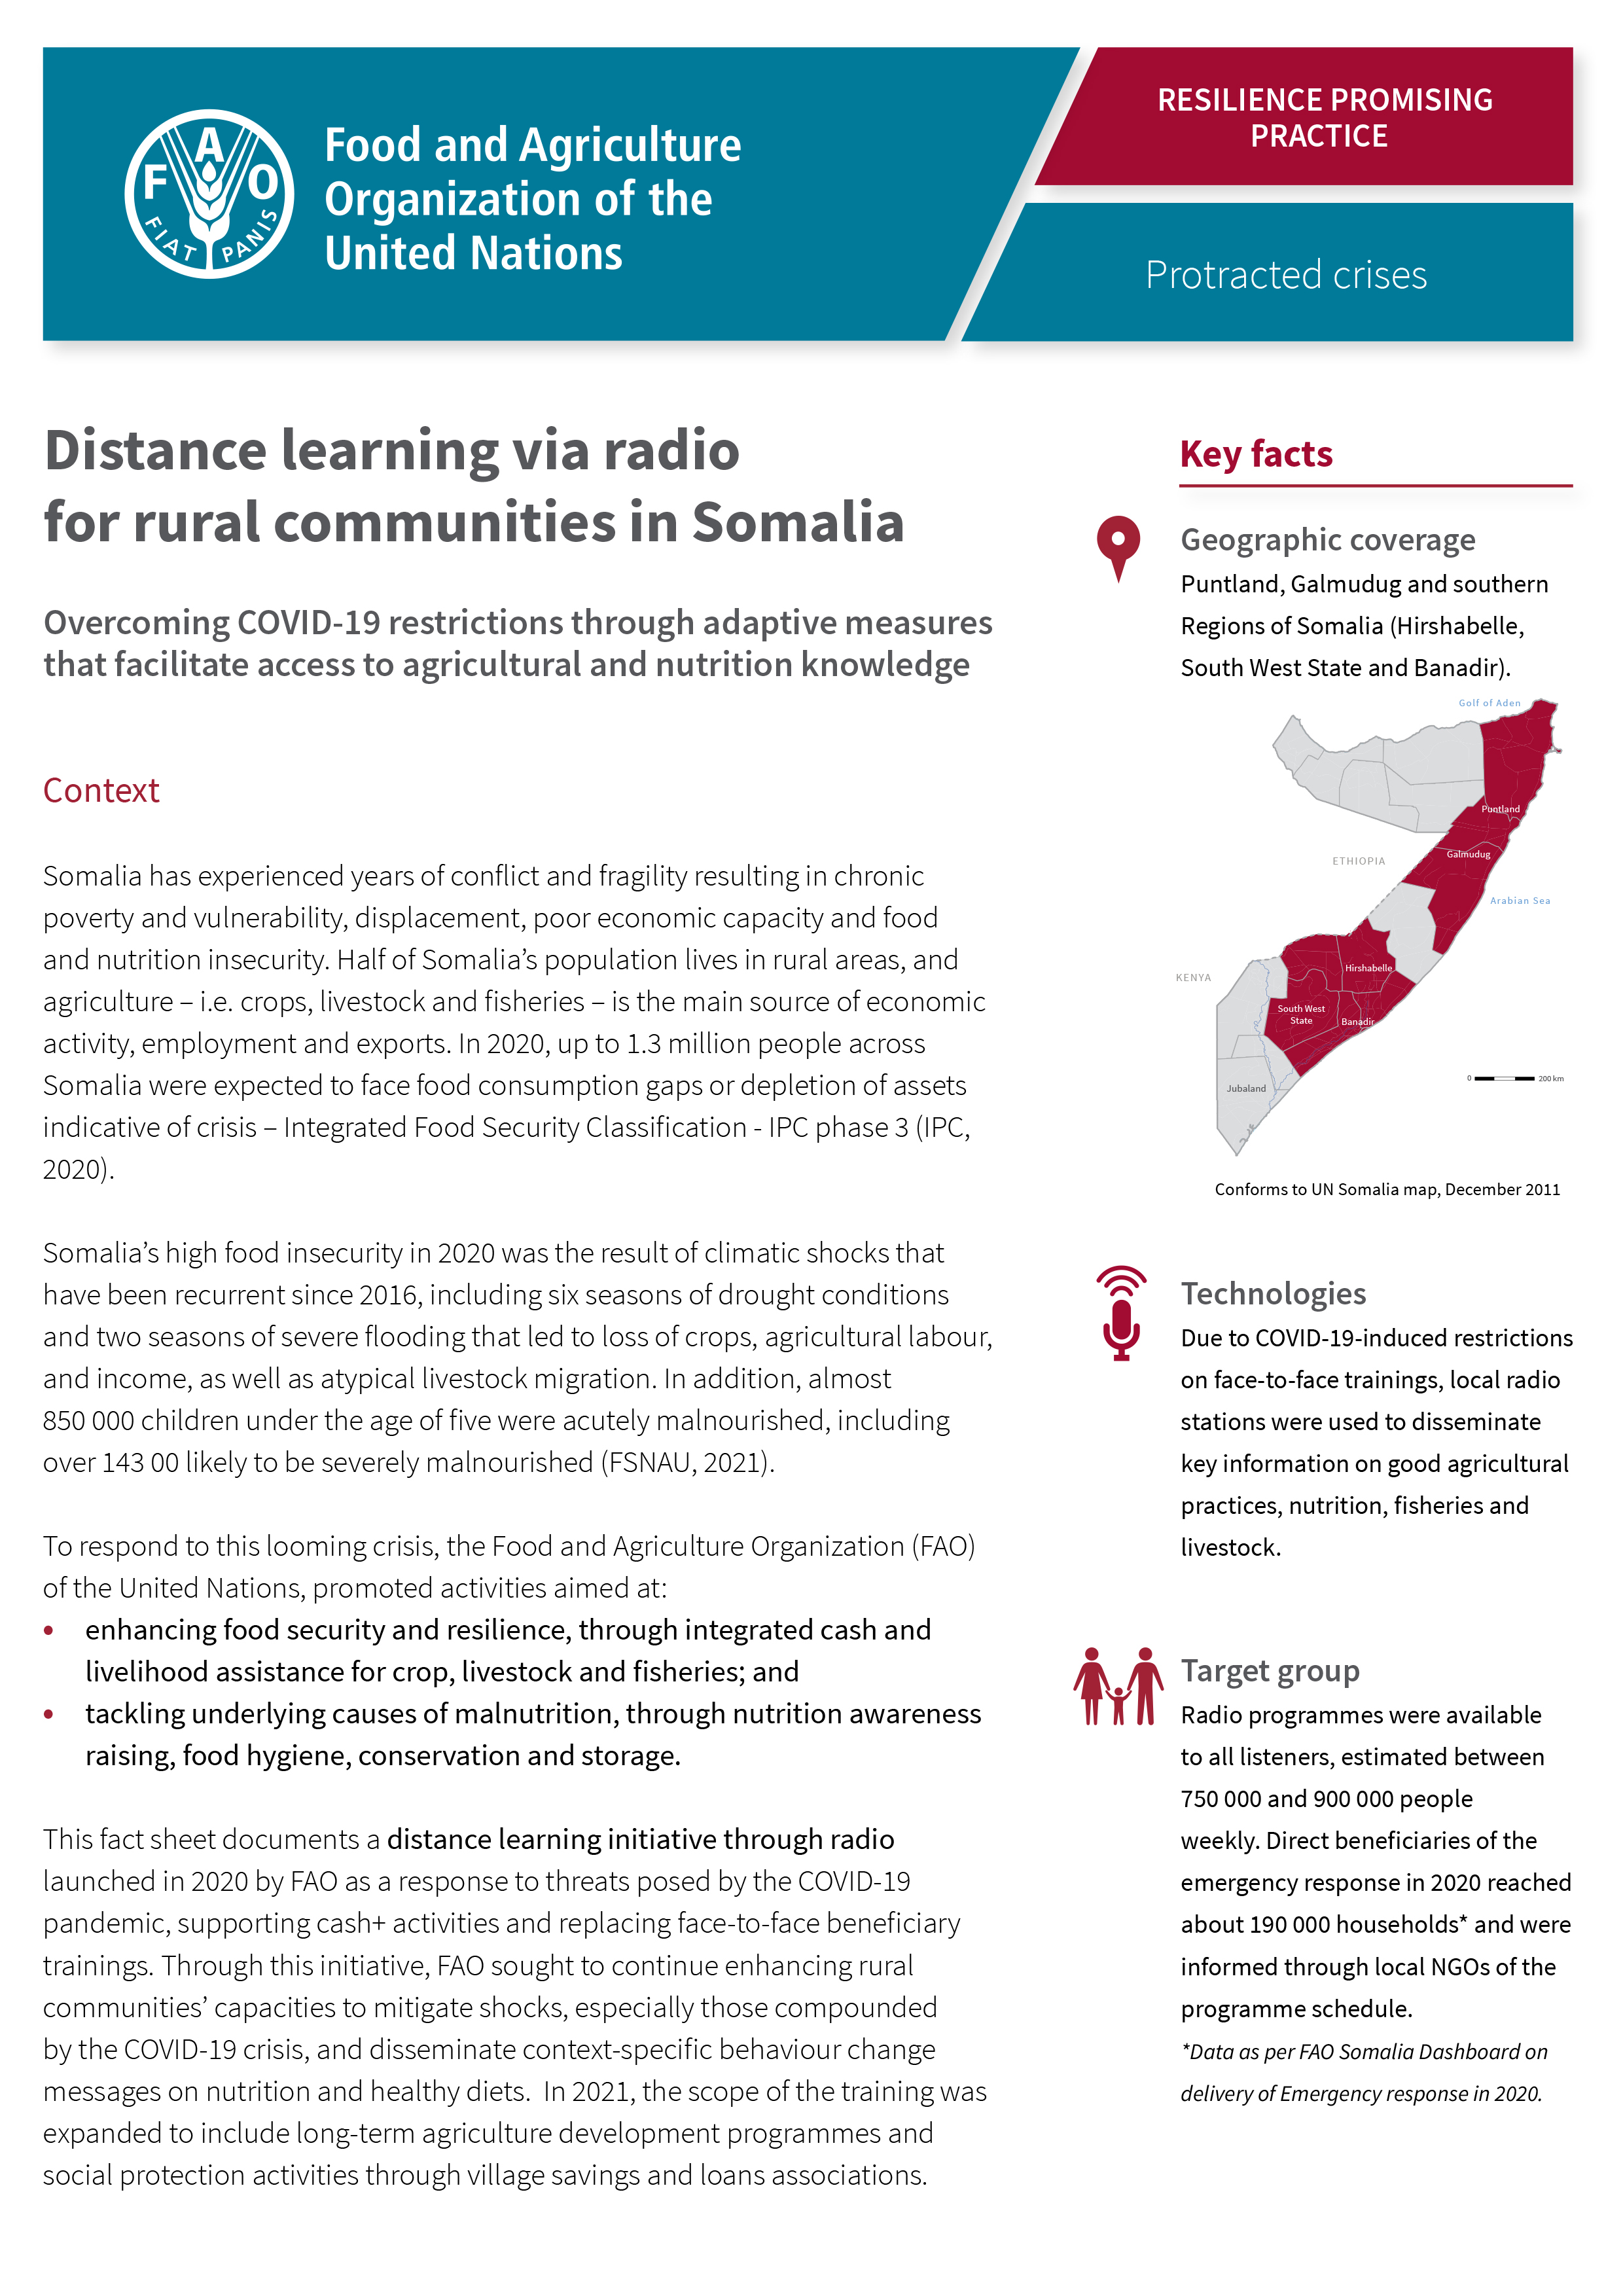 Distance learning via radio for rural communities in Somalia |KORE -  Knowledge Sharing Platform on Resilience| Food and Agriculture Organization  of the United Nations